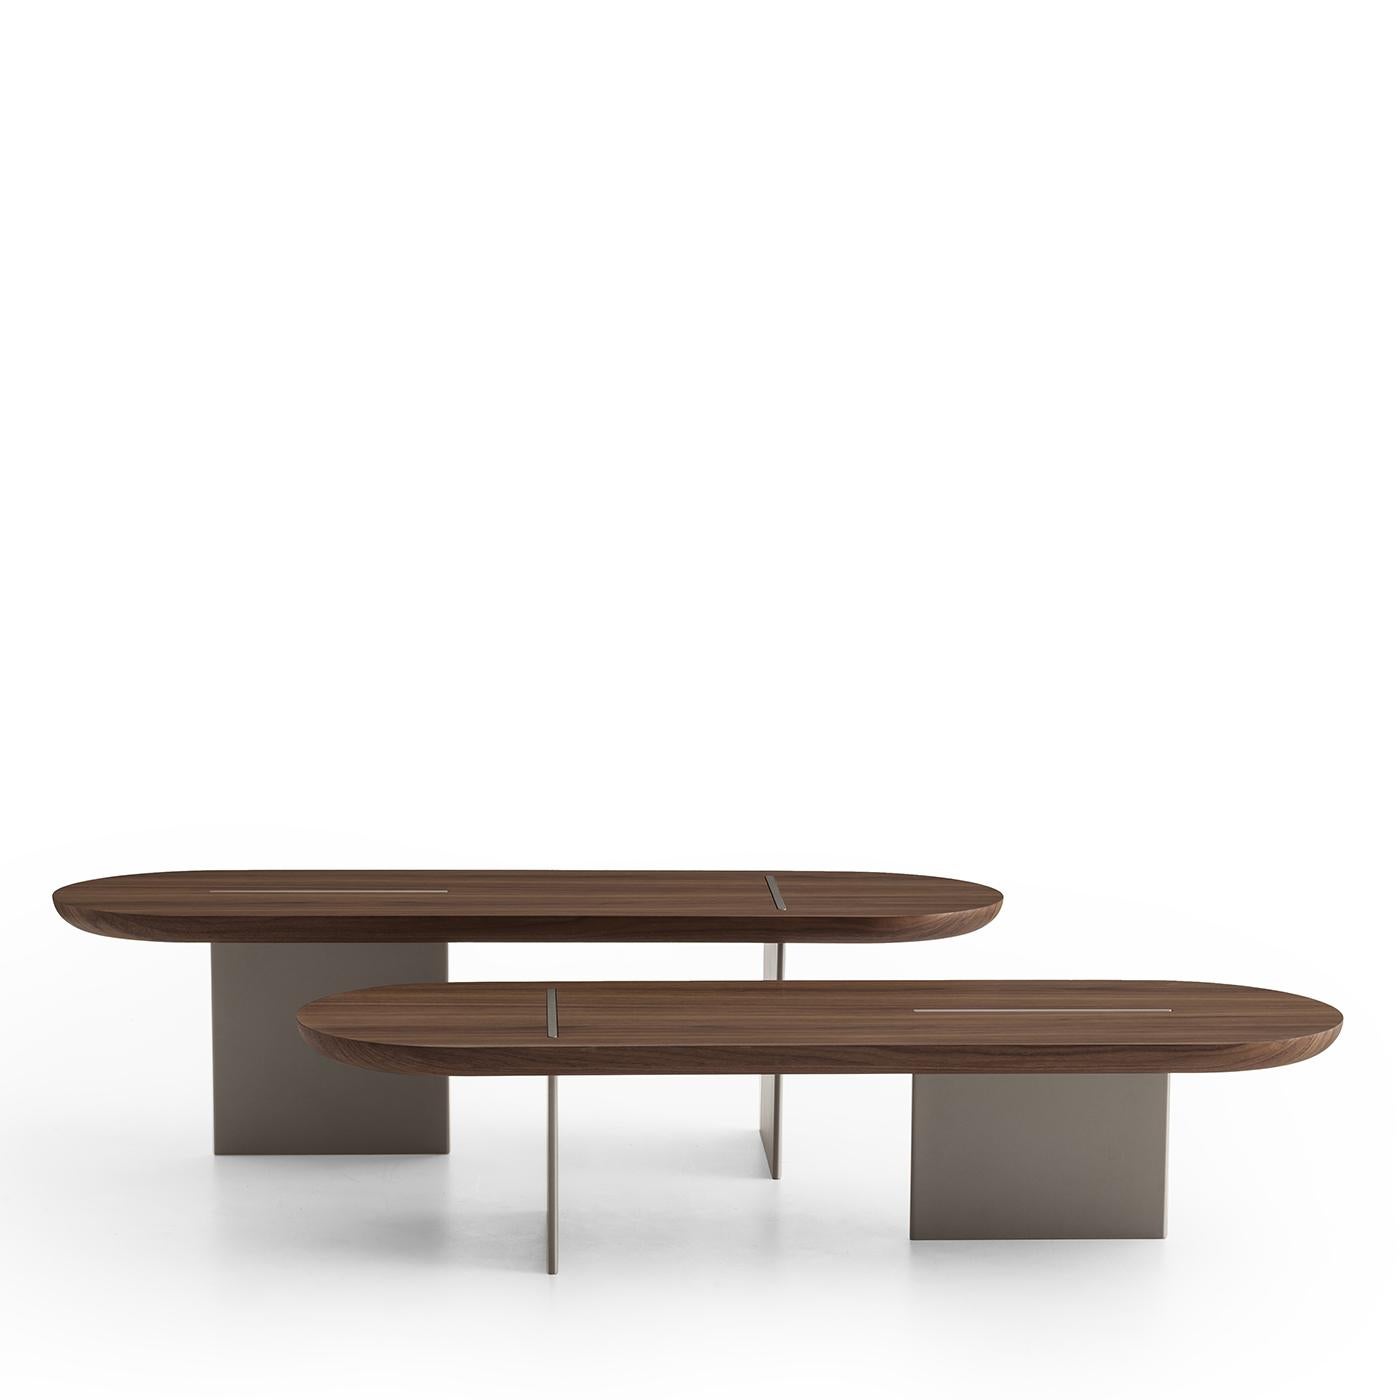 An elongated MDF top with rounded extremities, veneered in precious Canaletto walnut, and featuring a blunted profile is the element explaining the reason this design is named after the typical French baguette. It includes a sculptural and airy base